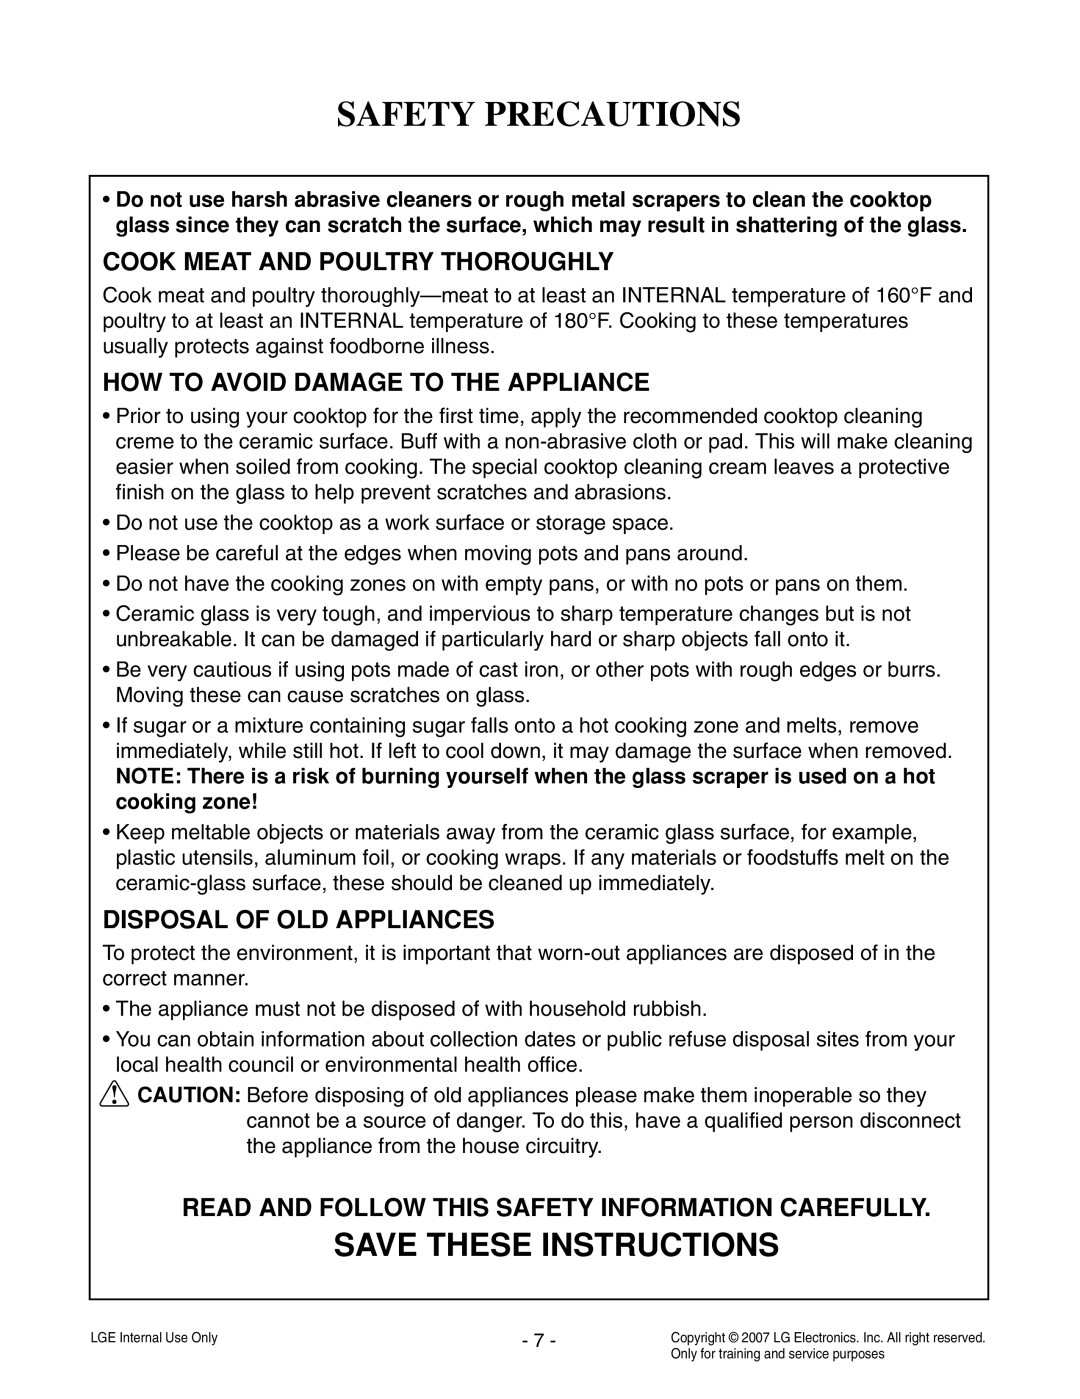 LG Electronics LCE30845 service manual Safety Precautions, Save These Instructions, Cook Meat And Poultry Thoroughly 